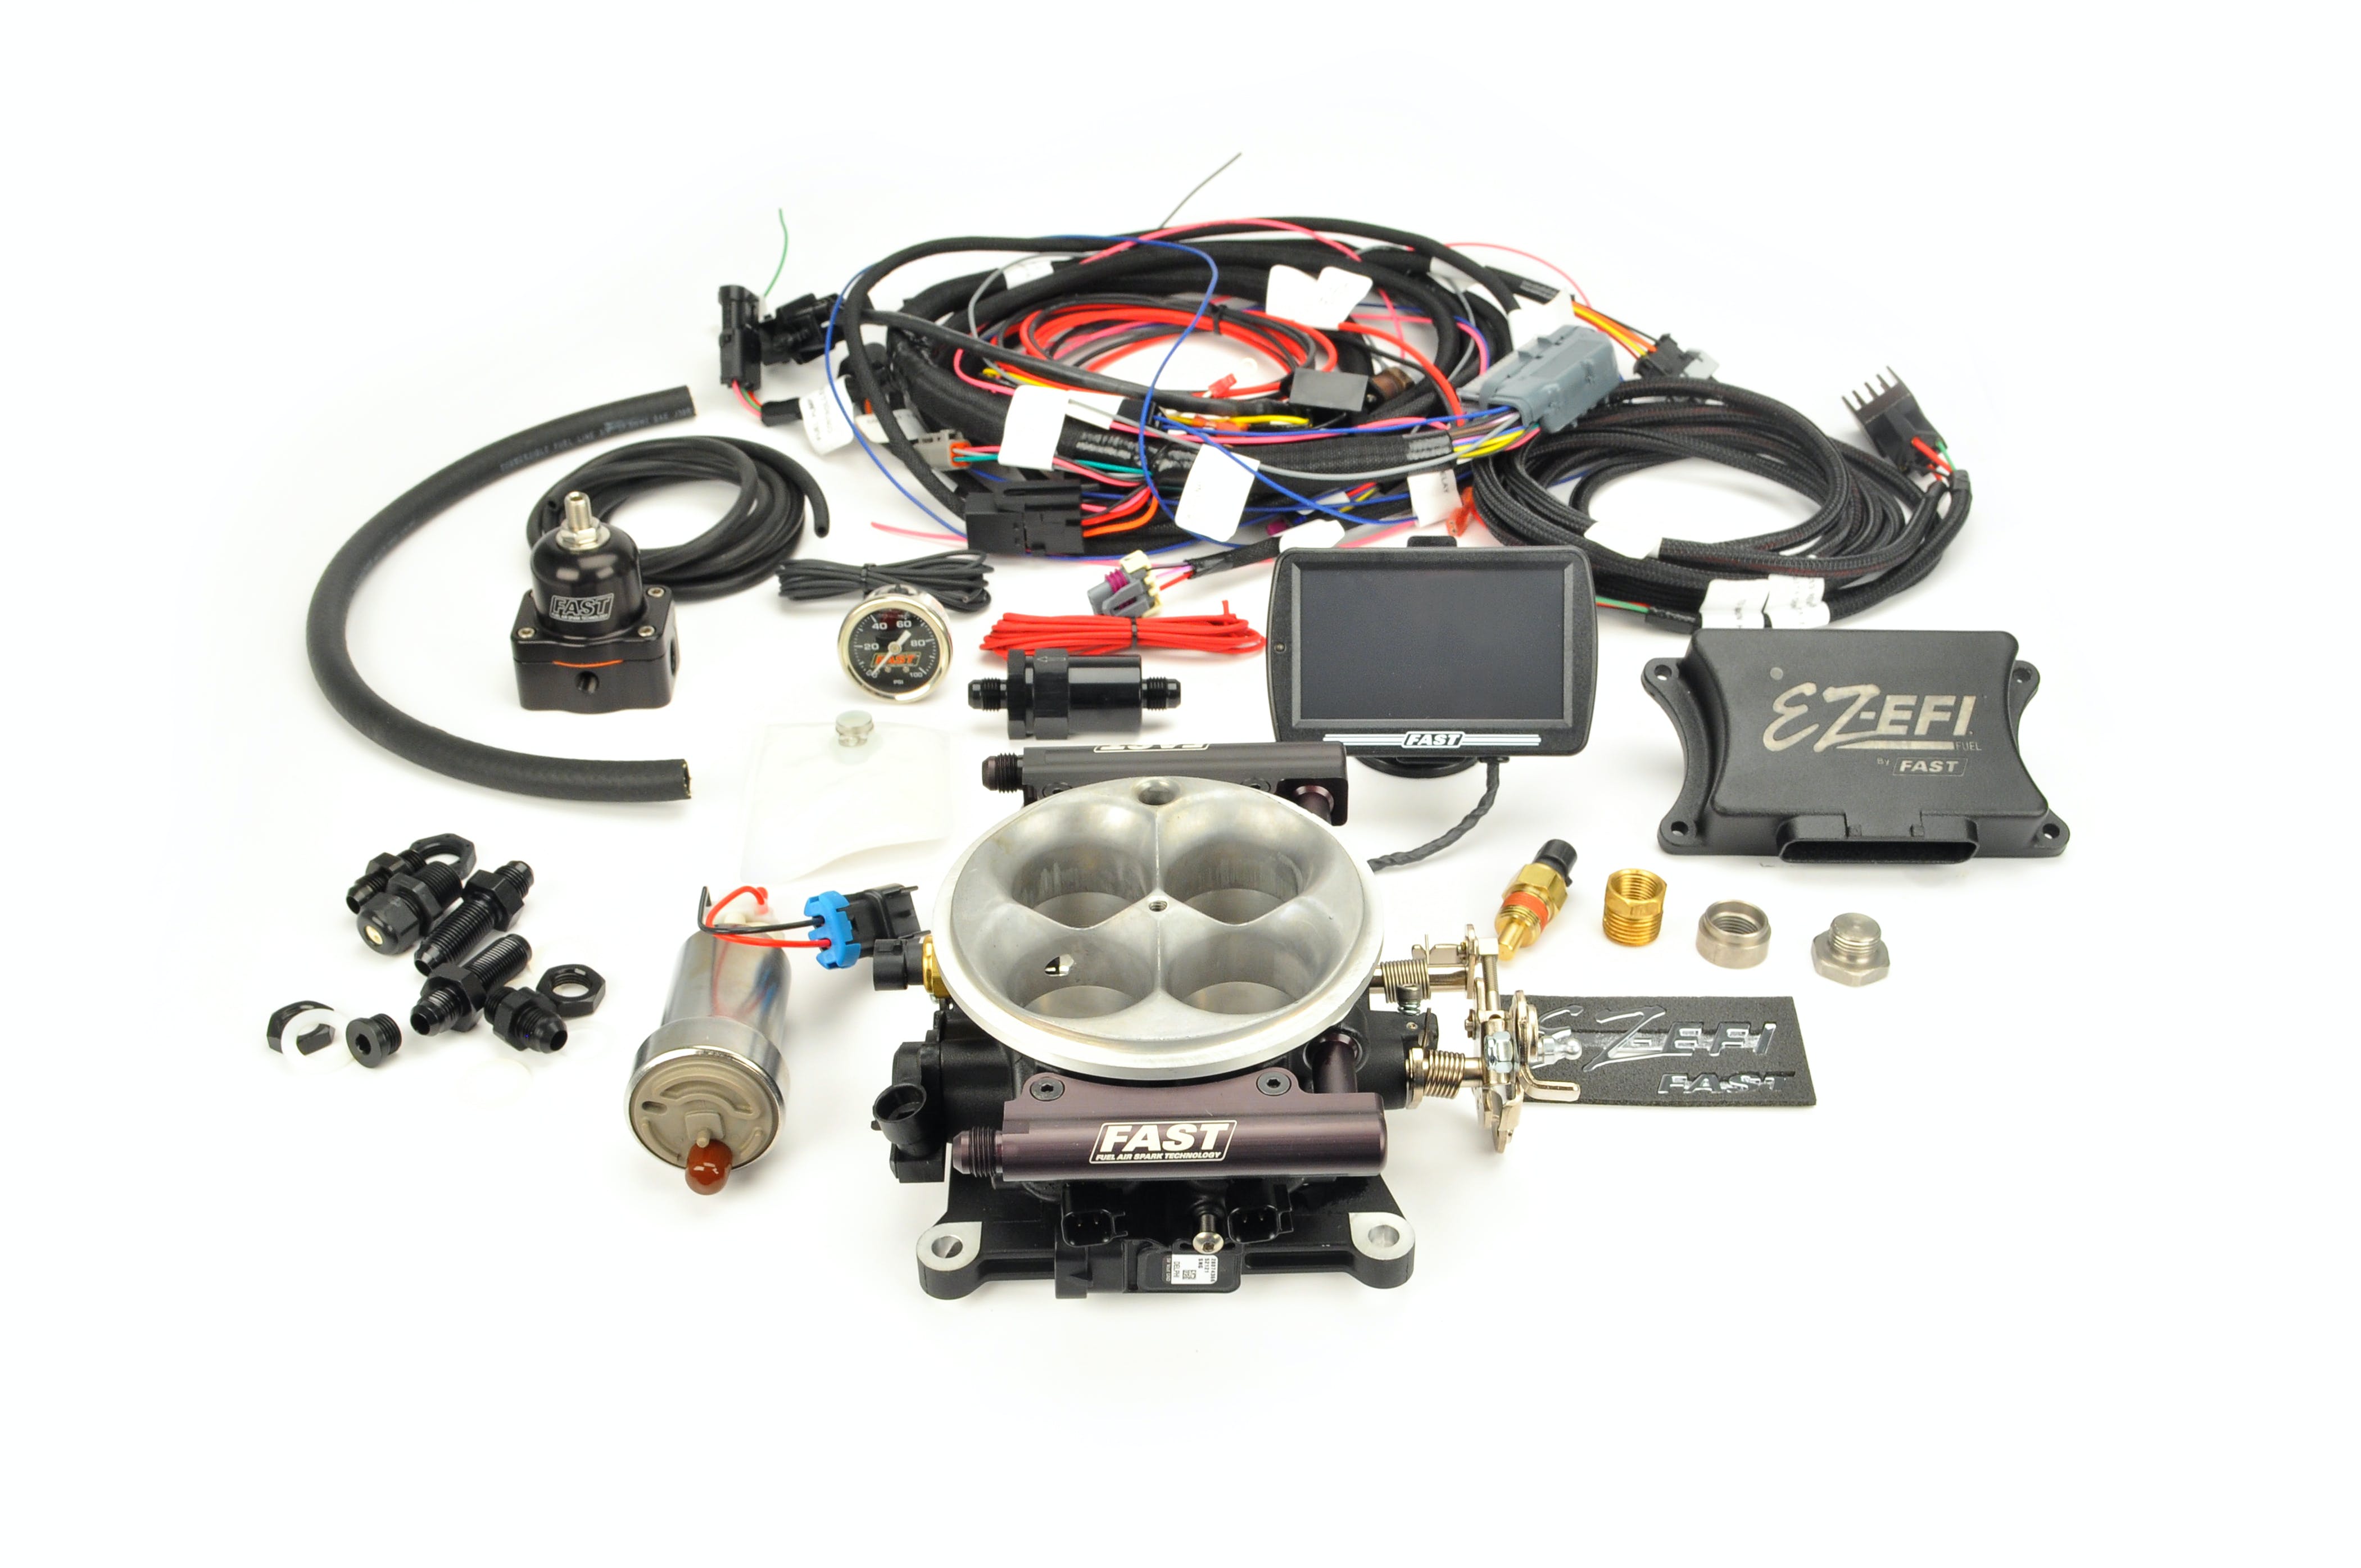 FAST - Fuel Air Spark Technology 30447-06KIT EZ Fuel Self-Tuning Throttle Body Injection Kit w/ In-Tank Fuel Pump